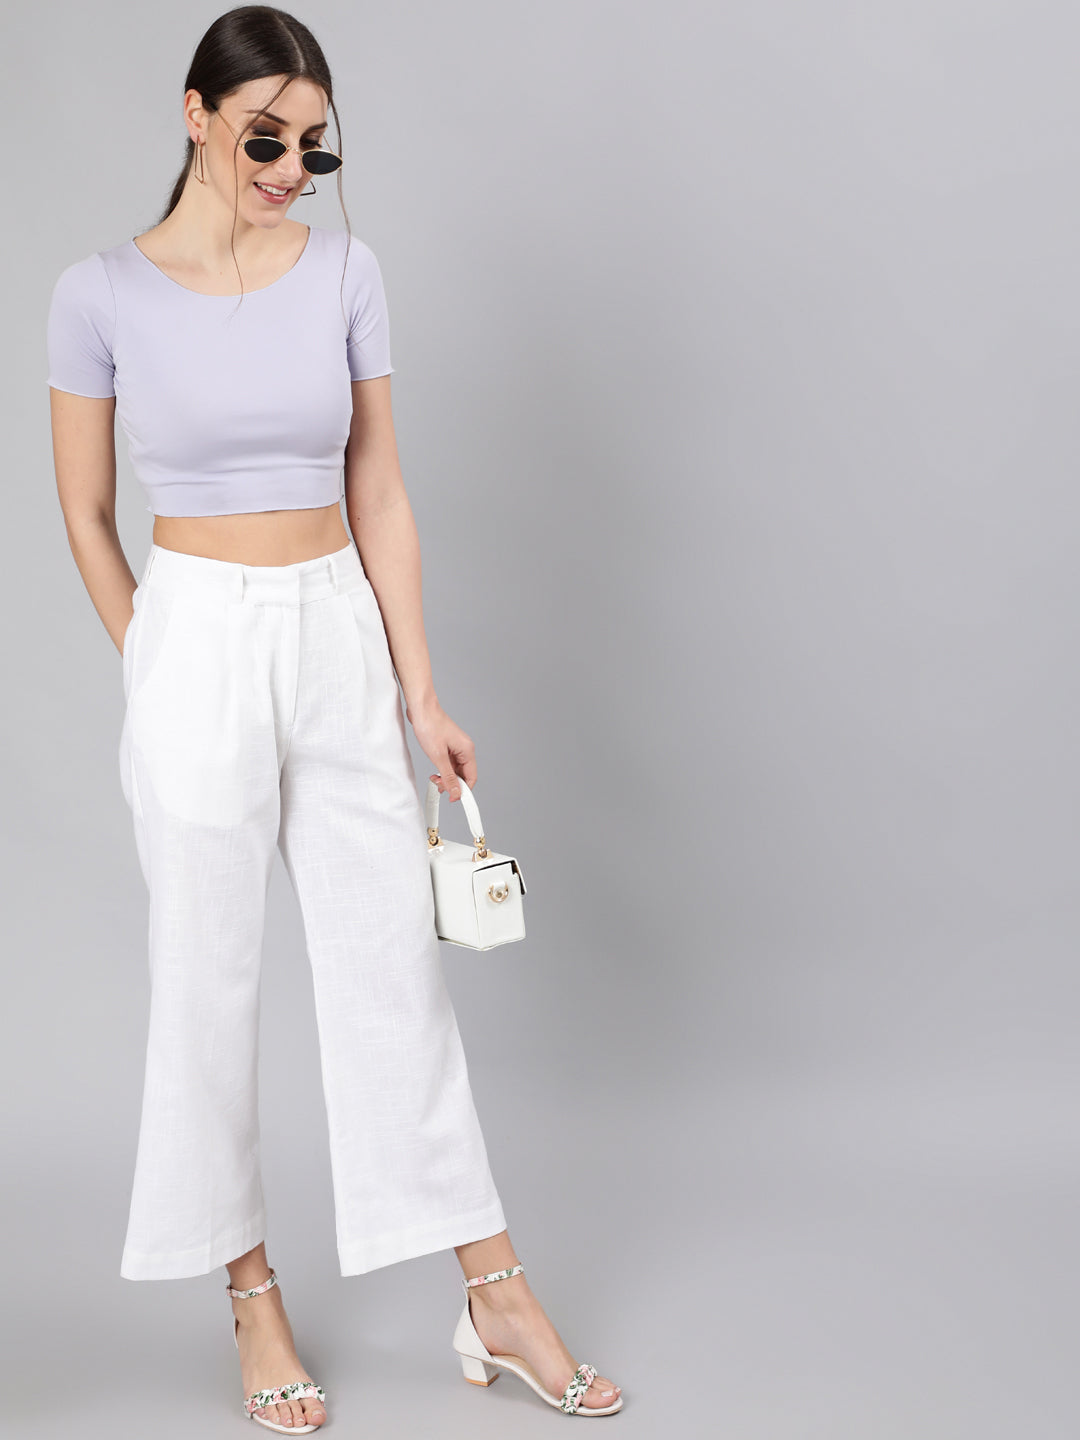 Get Ankle length Pants for Women